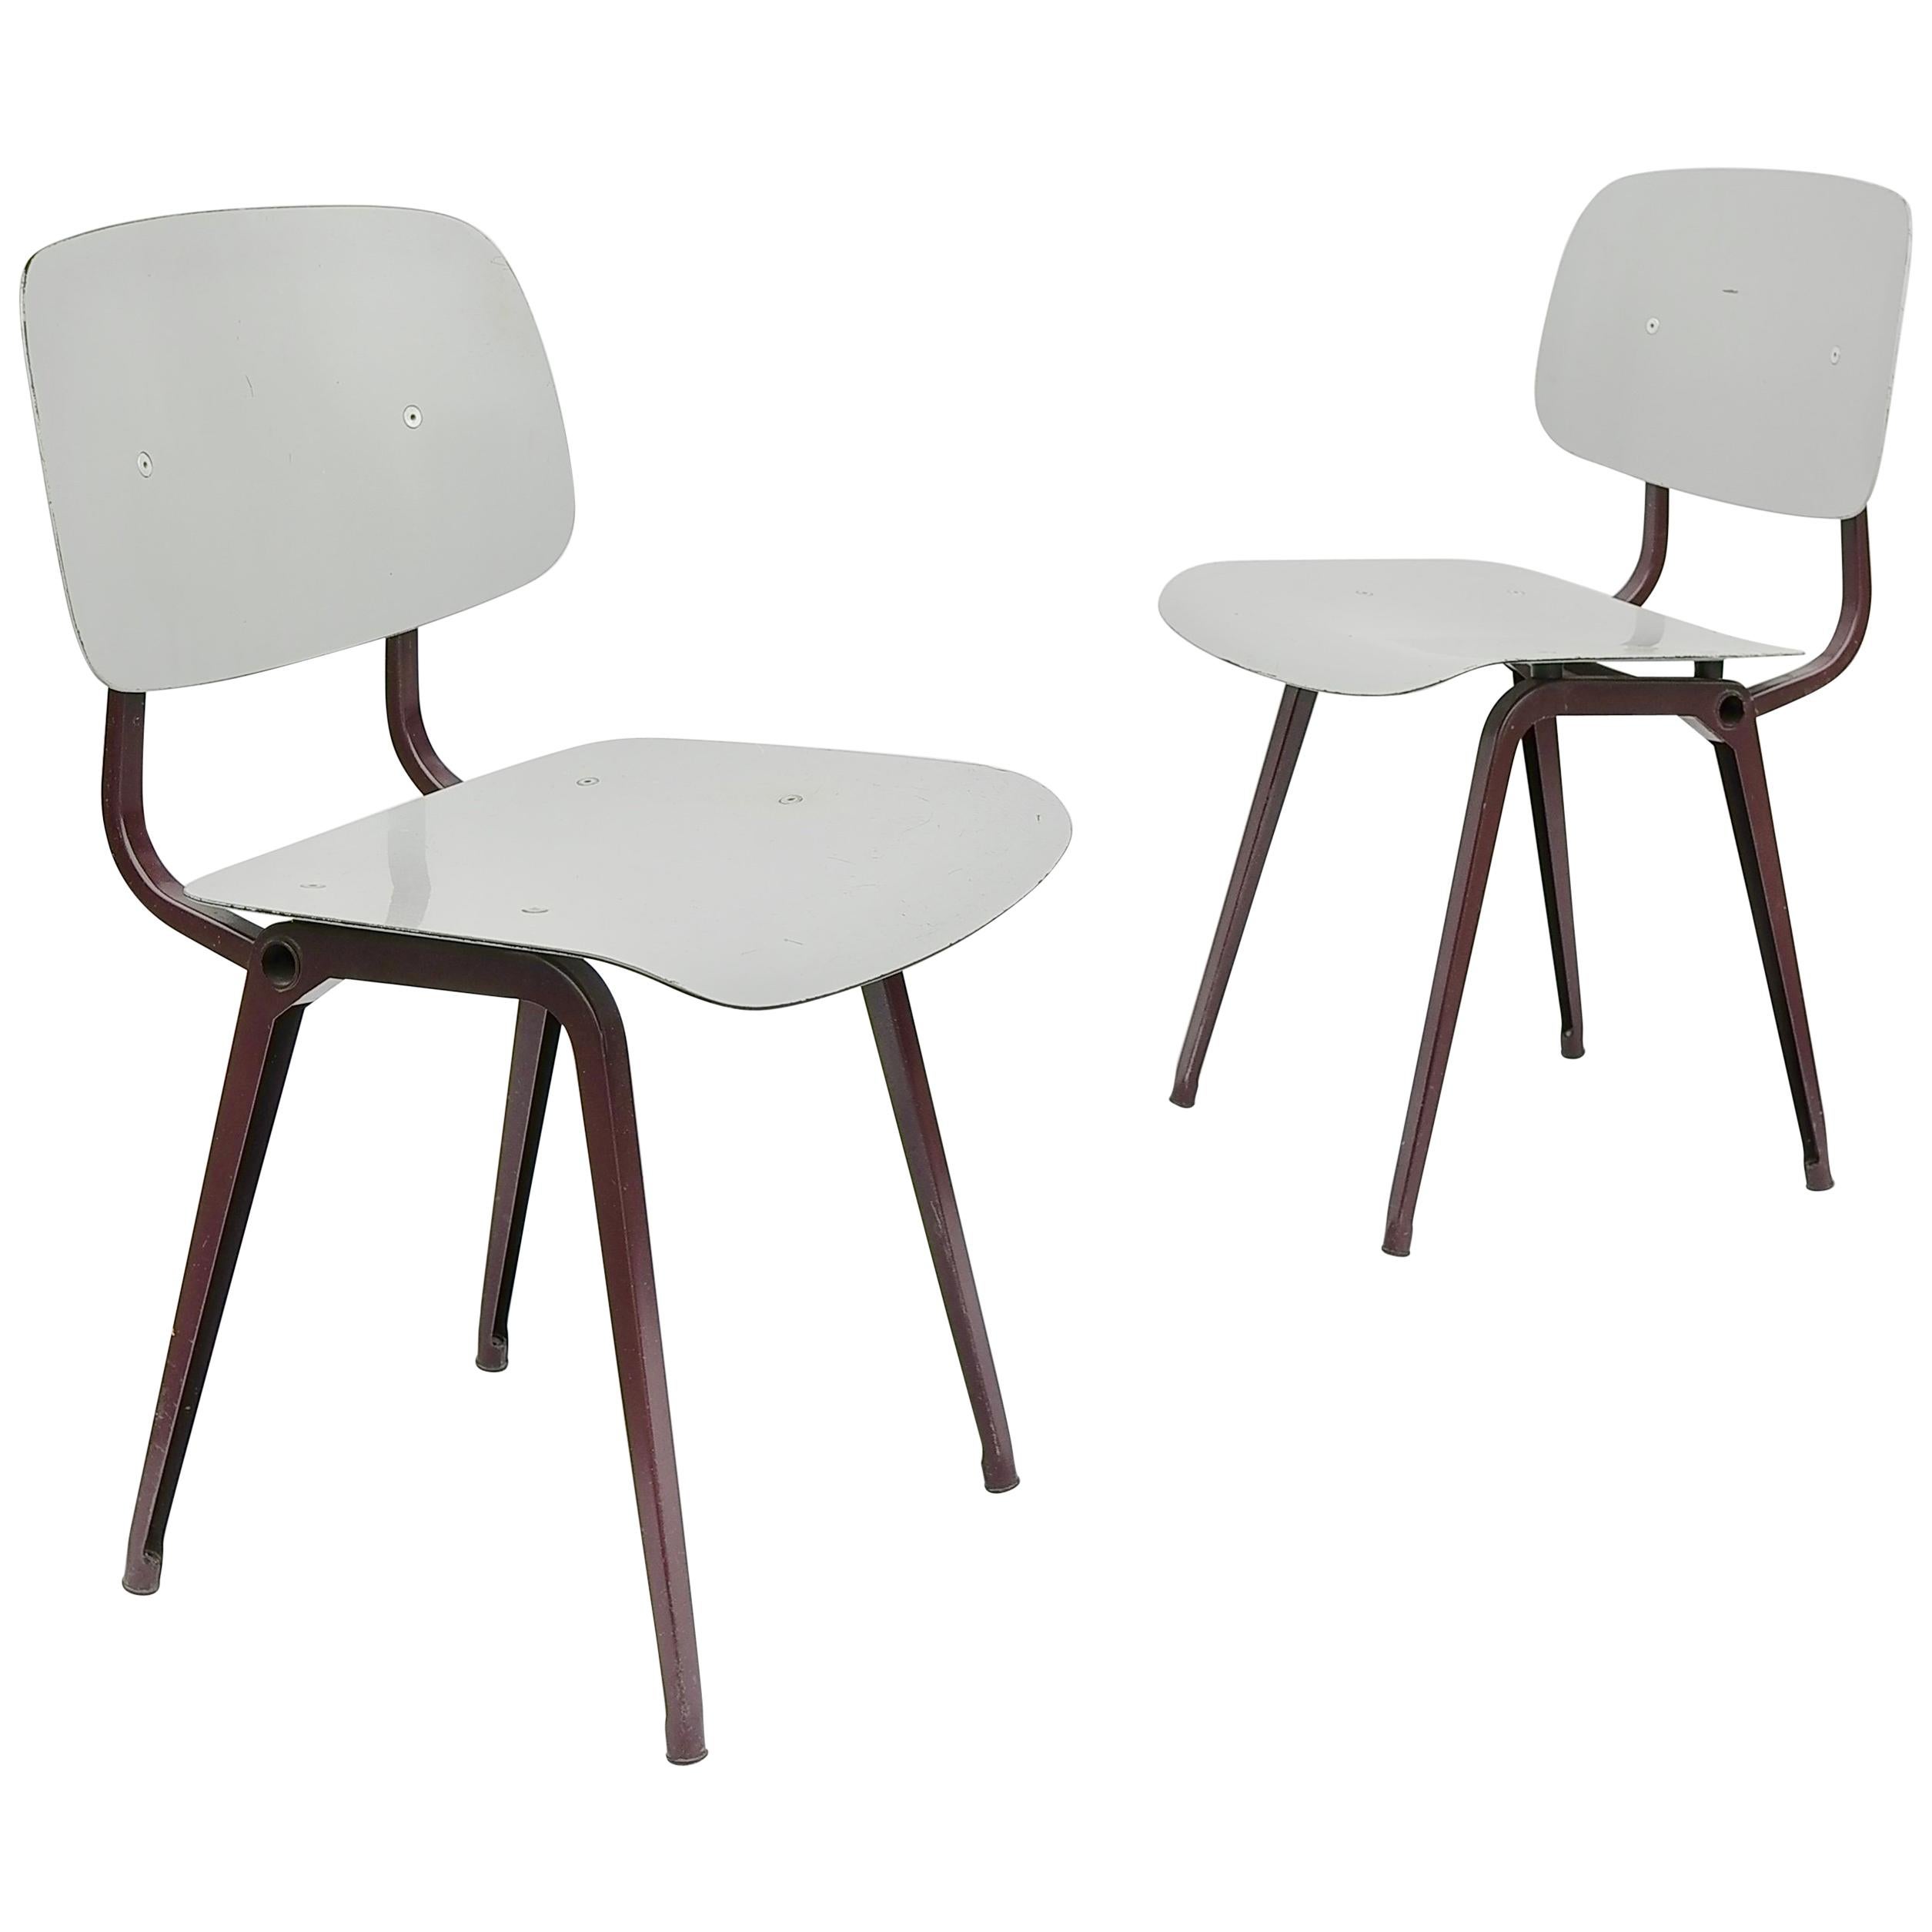 Rare Friso Kramer "Revolt" Chairs in Burgundy Red and Grey